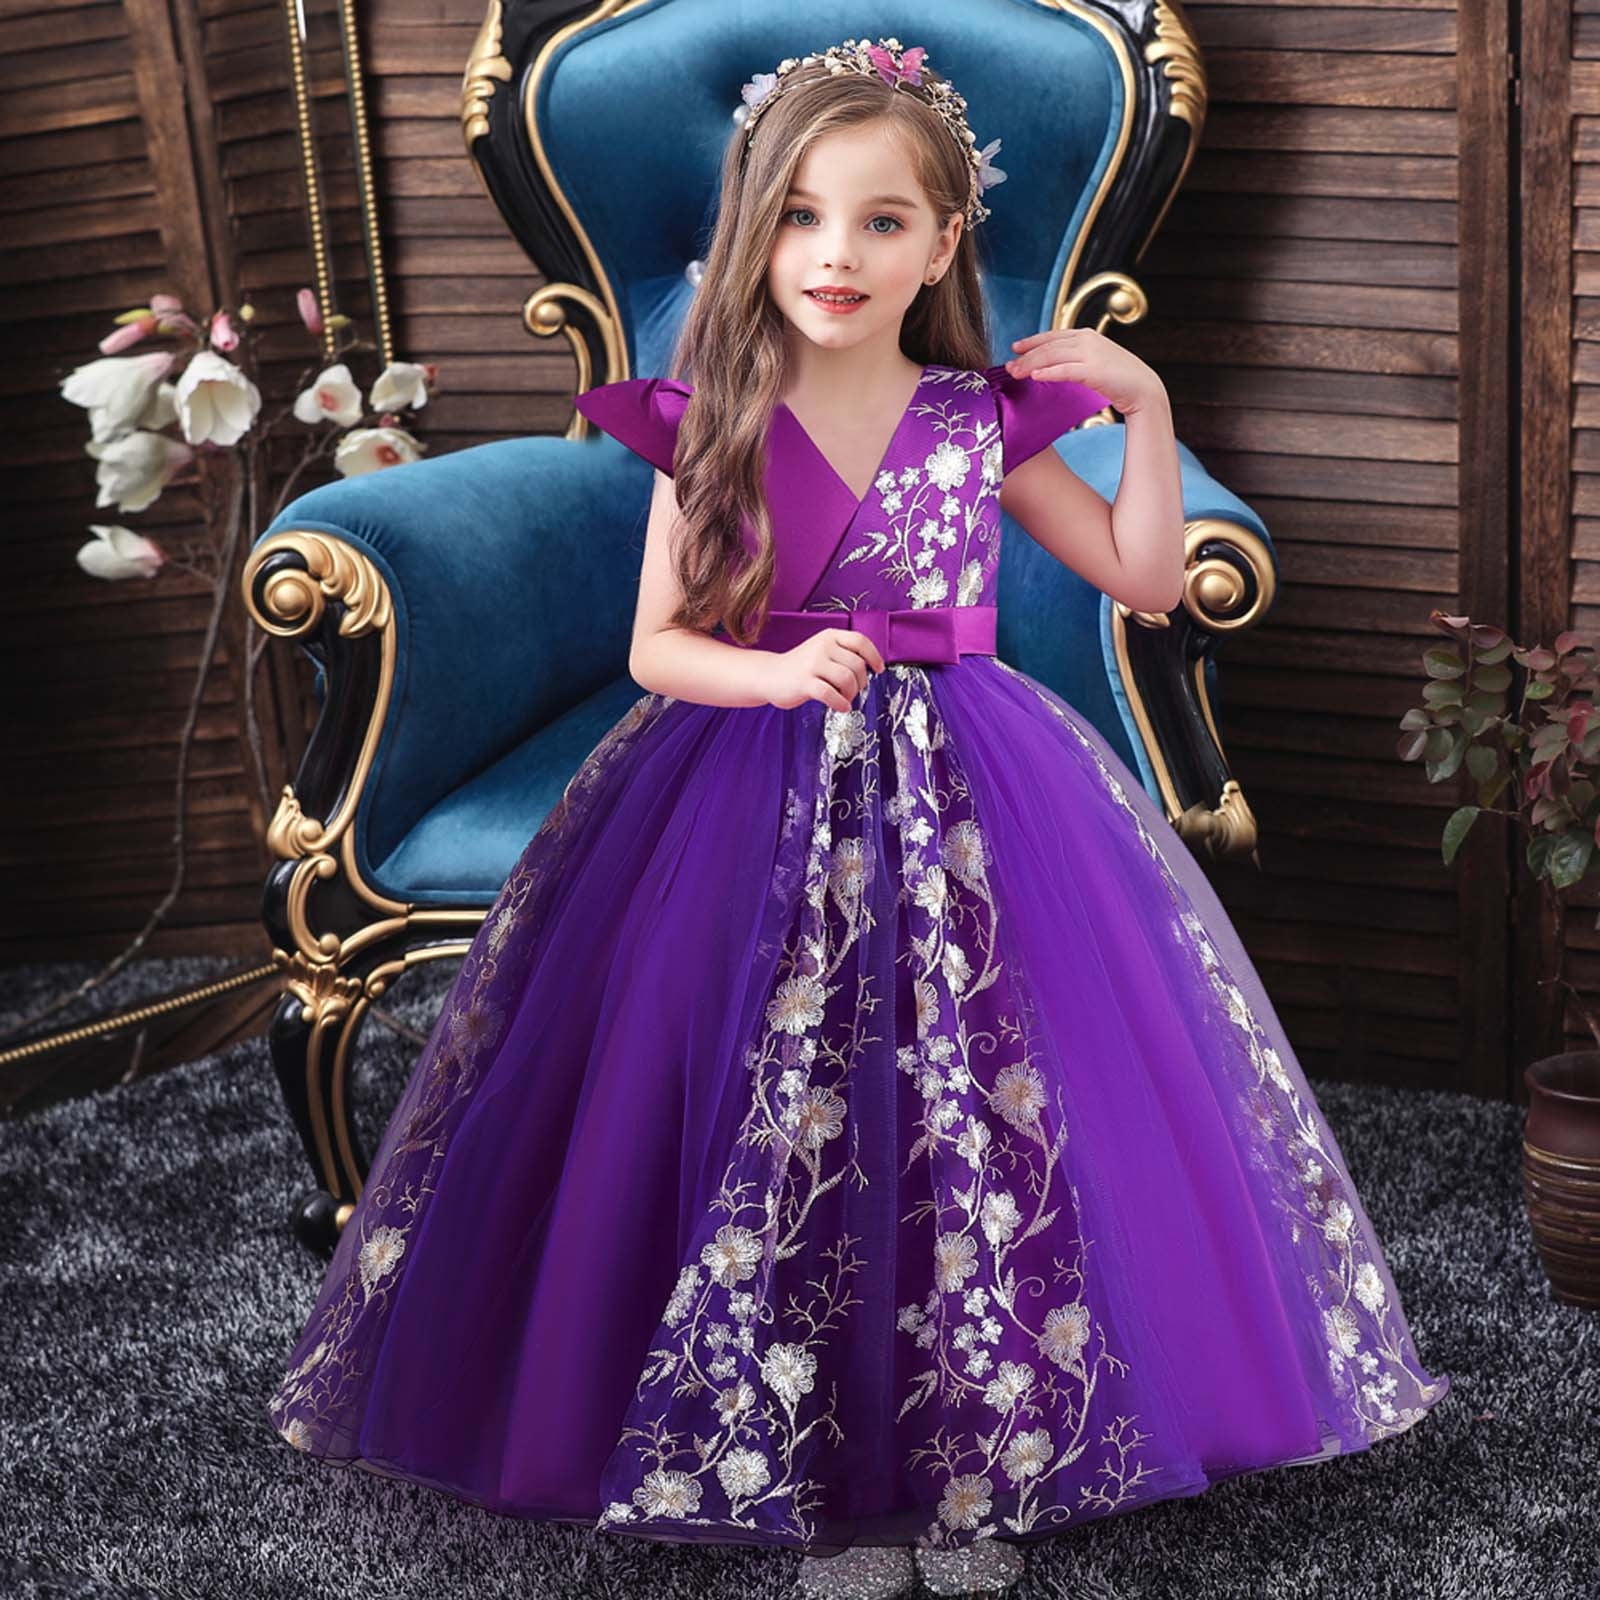 FATAPAESE 3D Floral Embroidery Child Bridesmaid Flower Girl Dress for  Wedding Fluffy Ball Gown Kid Princess Evening Prom Party